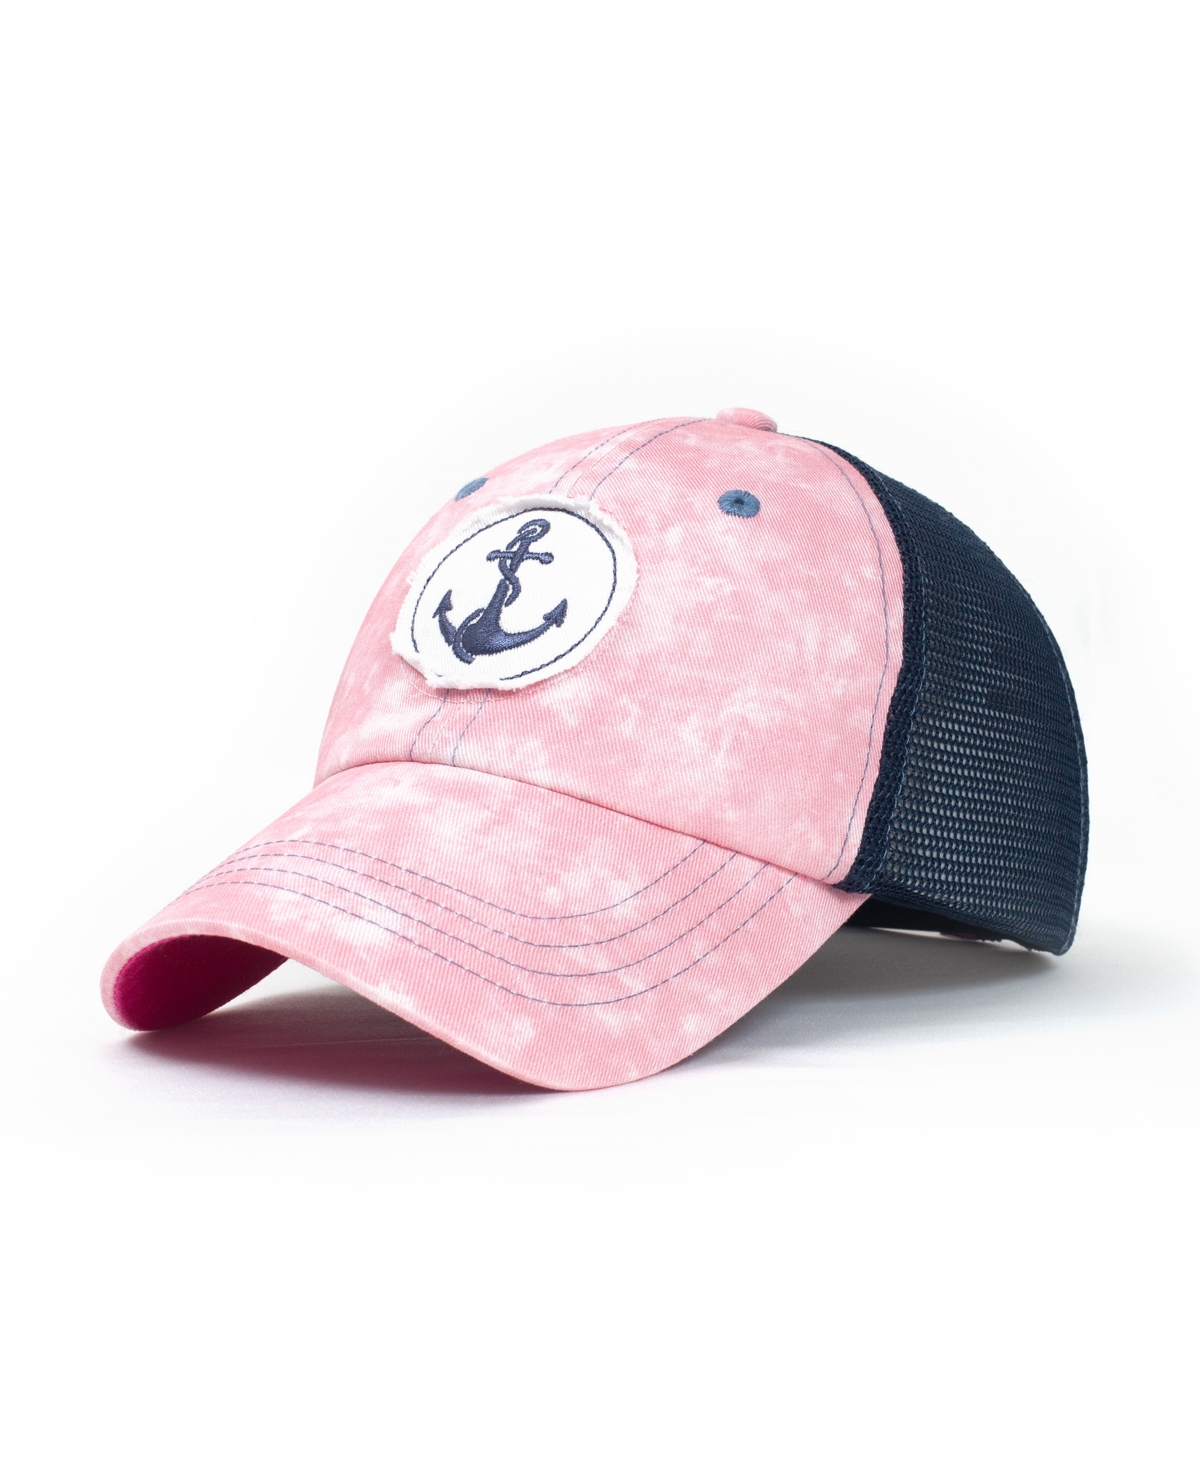 Matey Lady Women's Adjustable Snap Back Mesh Anchor Patch Trucker Hat - Pink, Blue